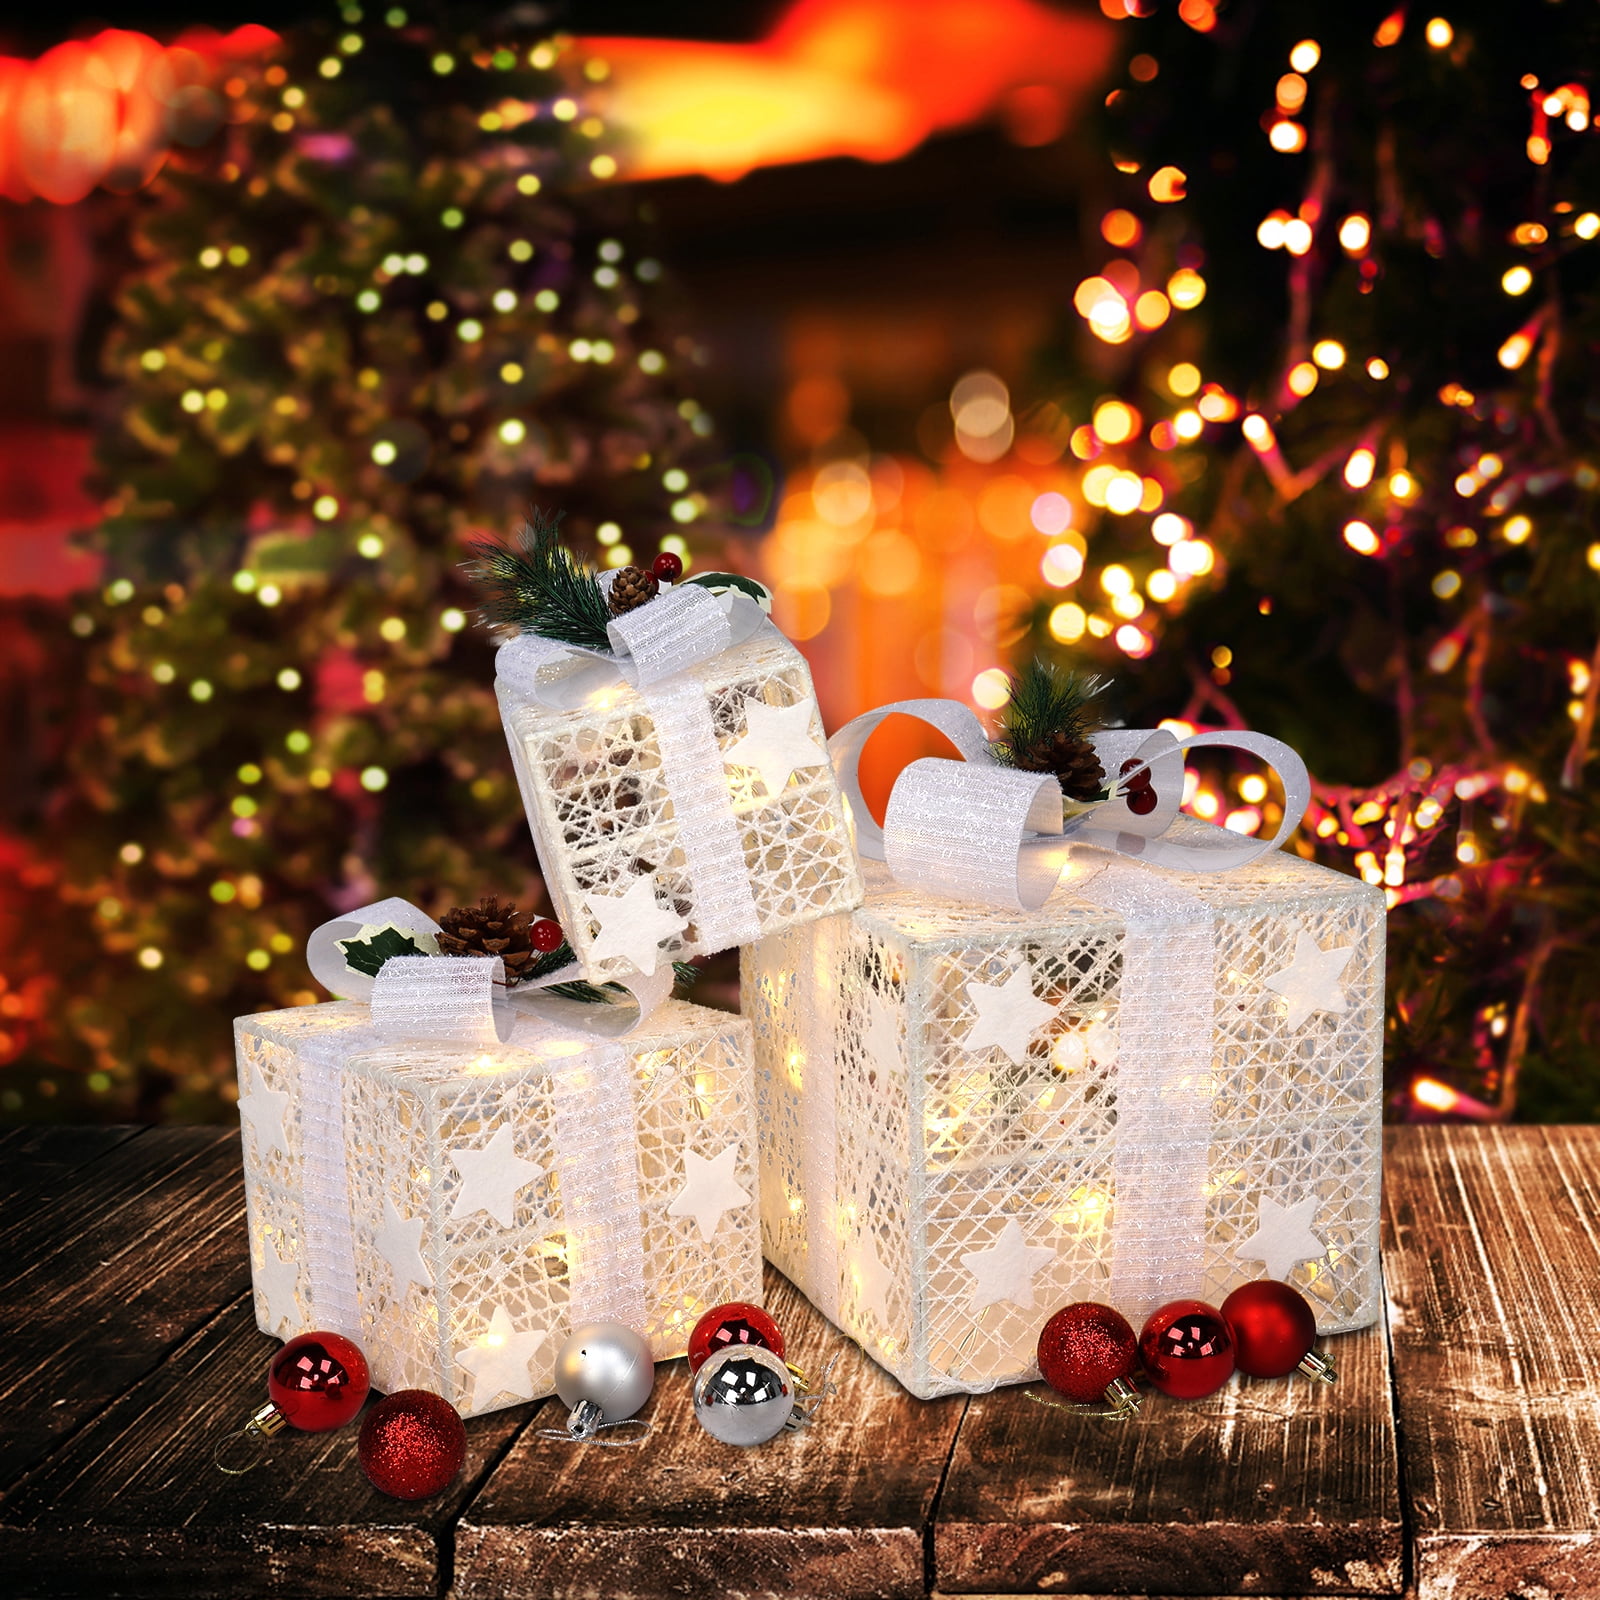 Resenkos Set of 3 Lighted Gift Boxes Christmas Decorations, Pre-lit Present Box with Bowknot for Outdoor Indoor Holiday Party Christmas Home Christmas Holiday Decor